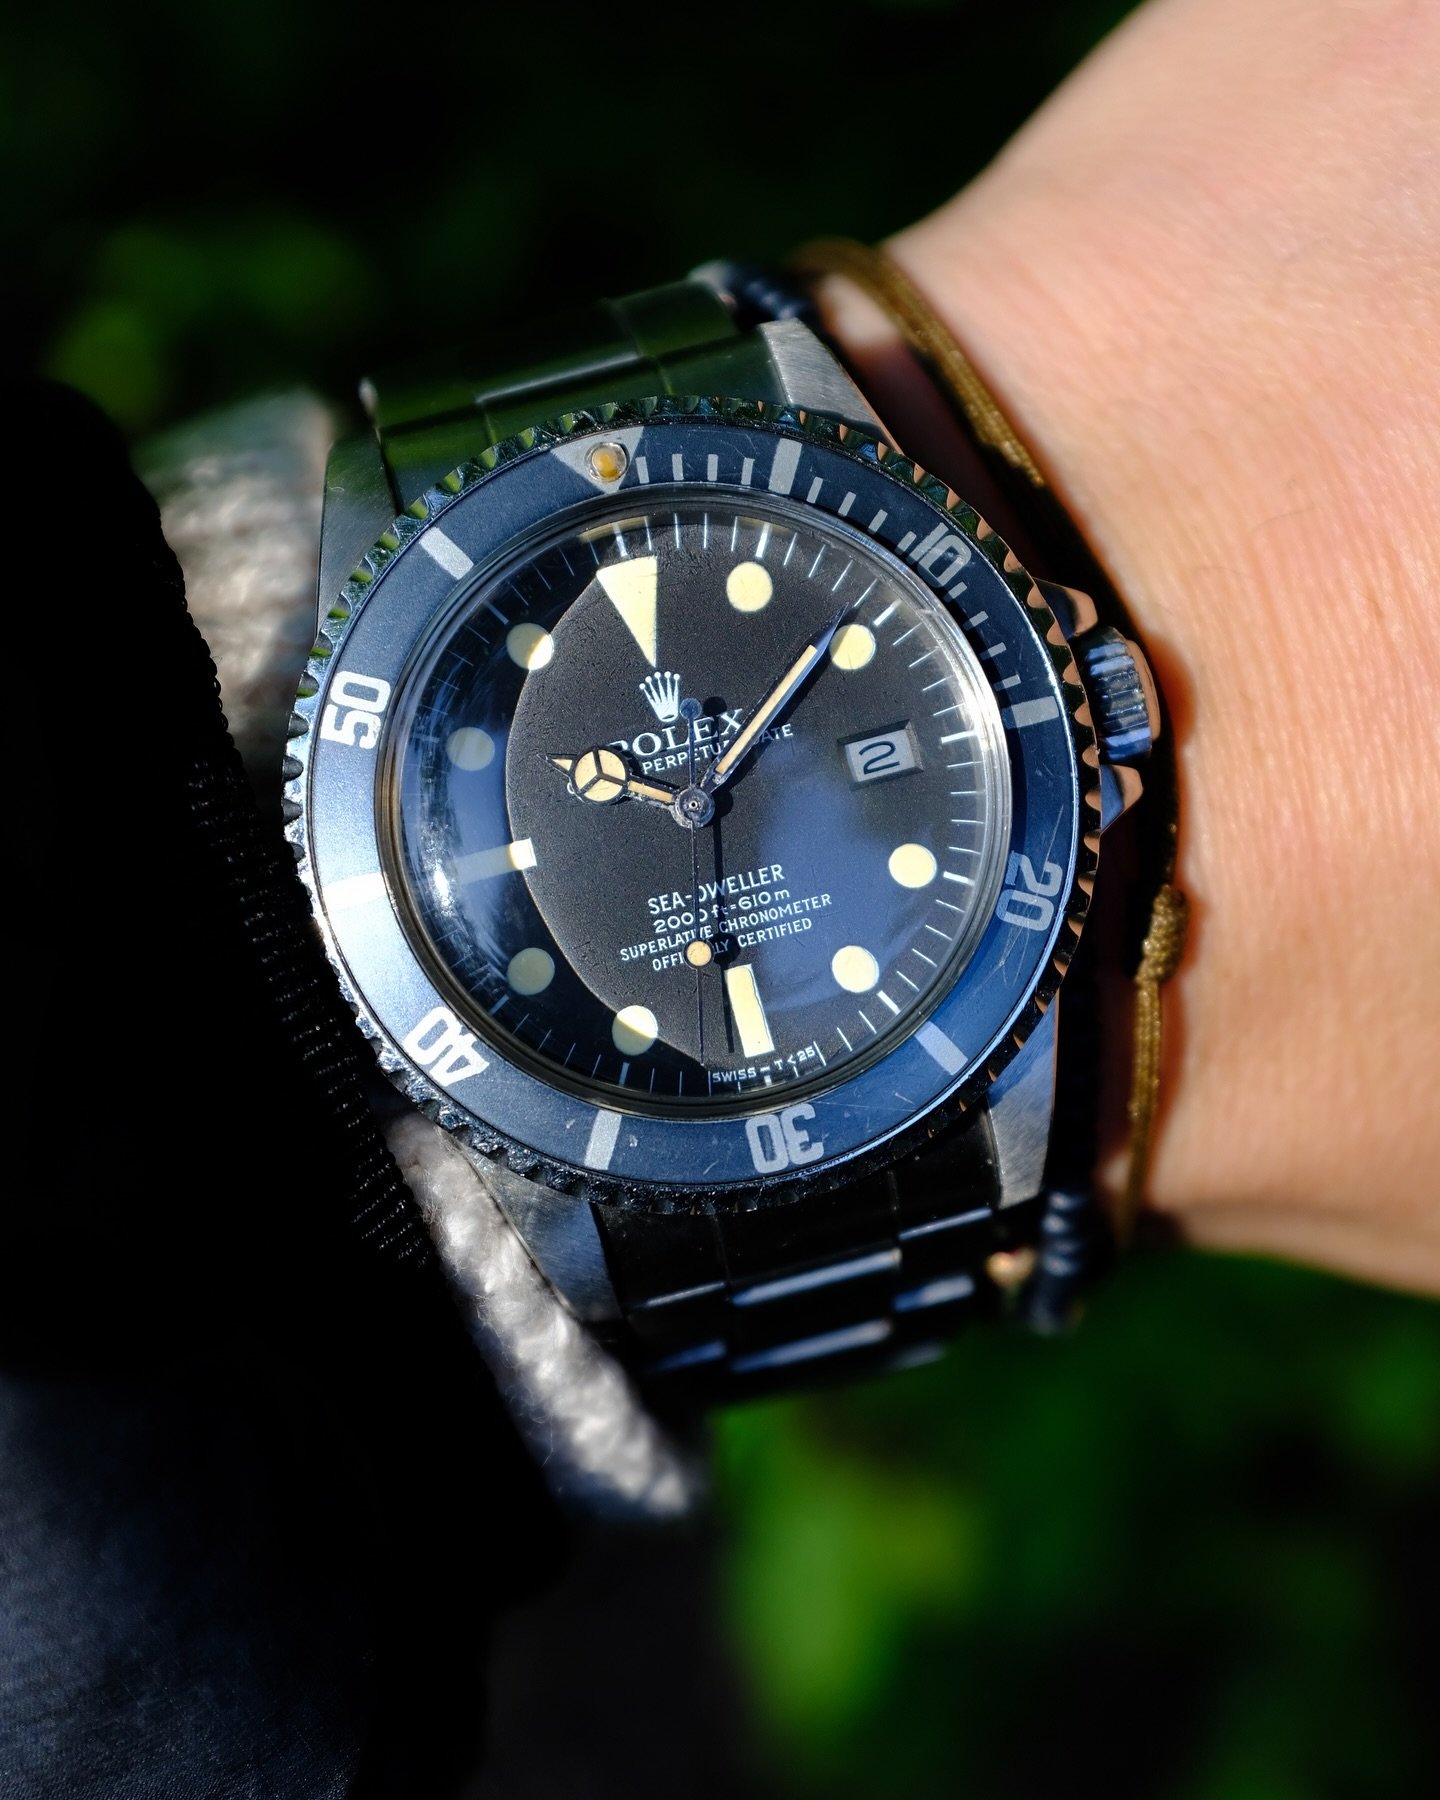 Ultra mega super fat font kissing 40 whatever you wanna call it MK3 grey bezel insert available for your Rolex 5513, 5512, 1680 Submariner. Looks pretty killer on this 1665 Sea-Dweller. 

Shoot me a message if you want it.